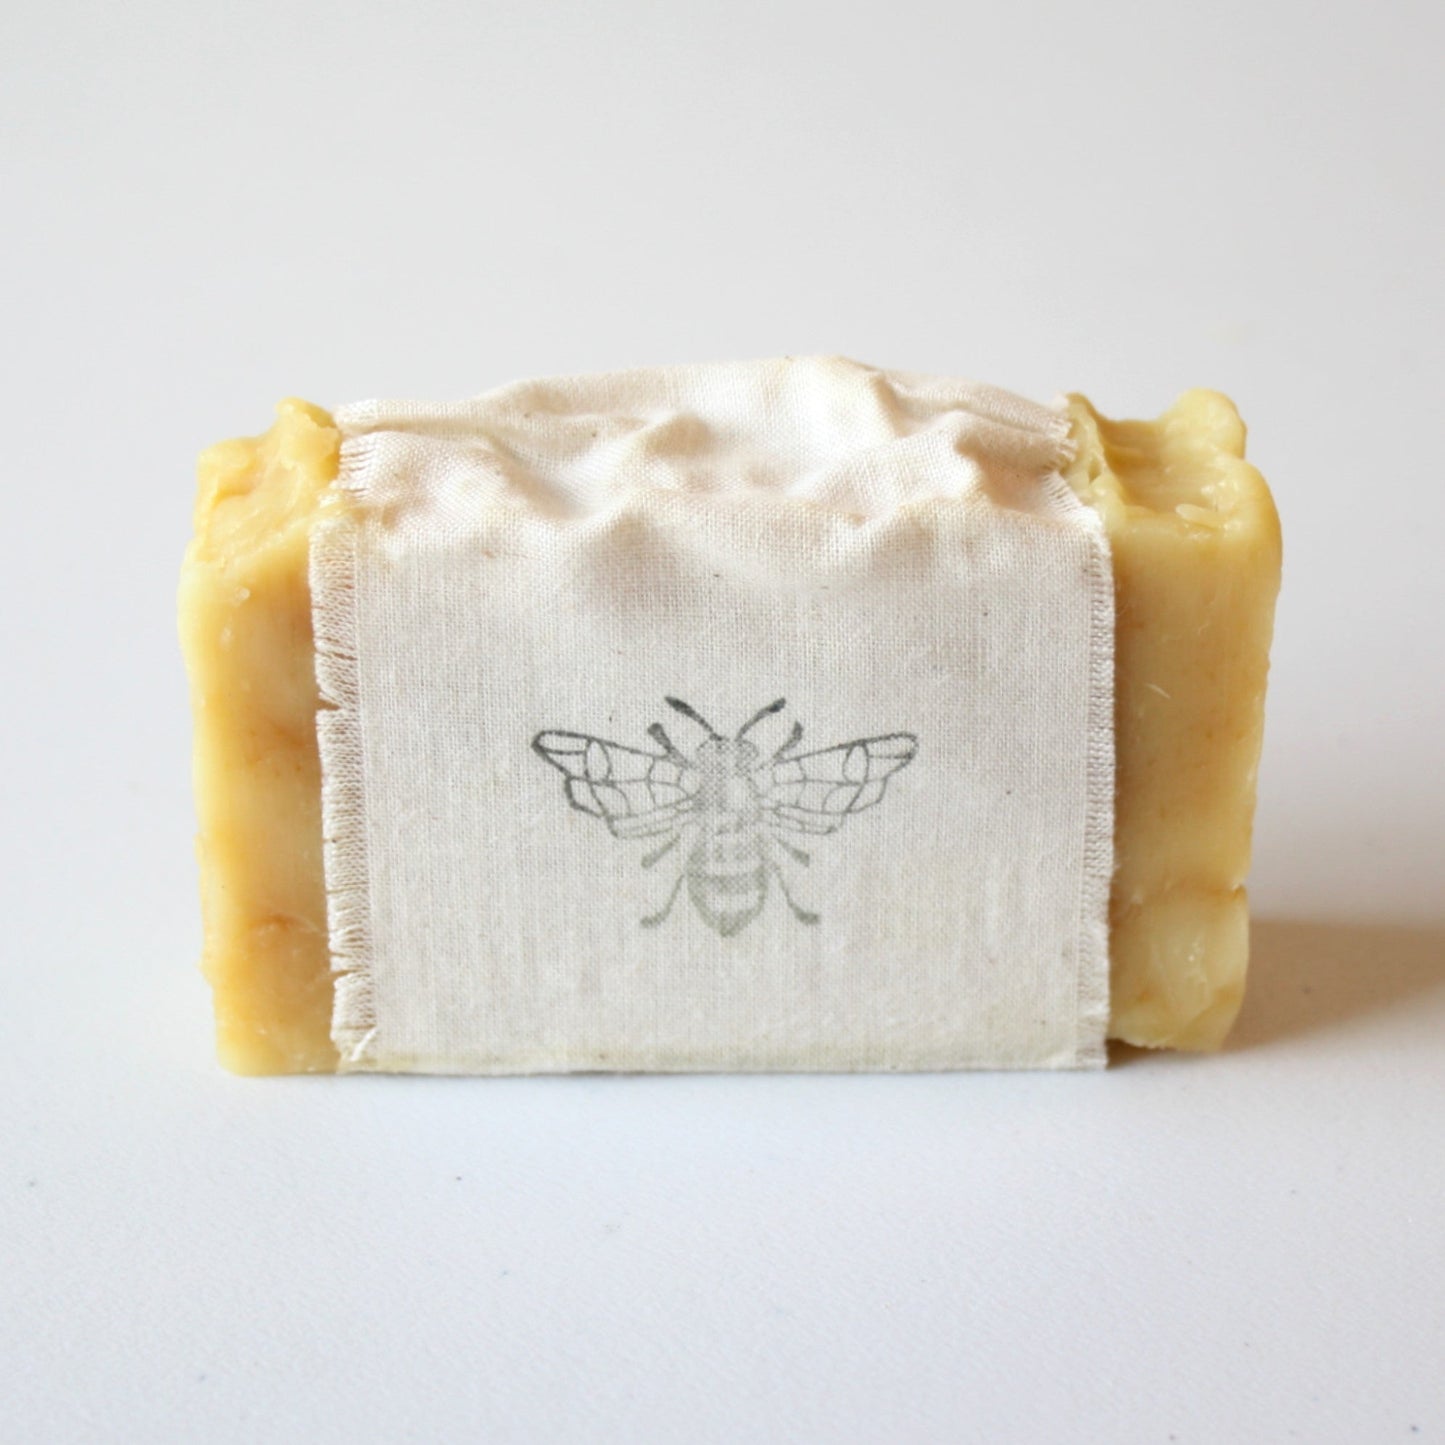 Beeswax and Raw Honey Bar Soap - Made in the USA